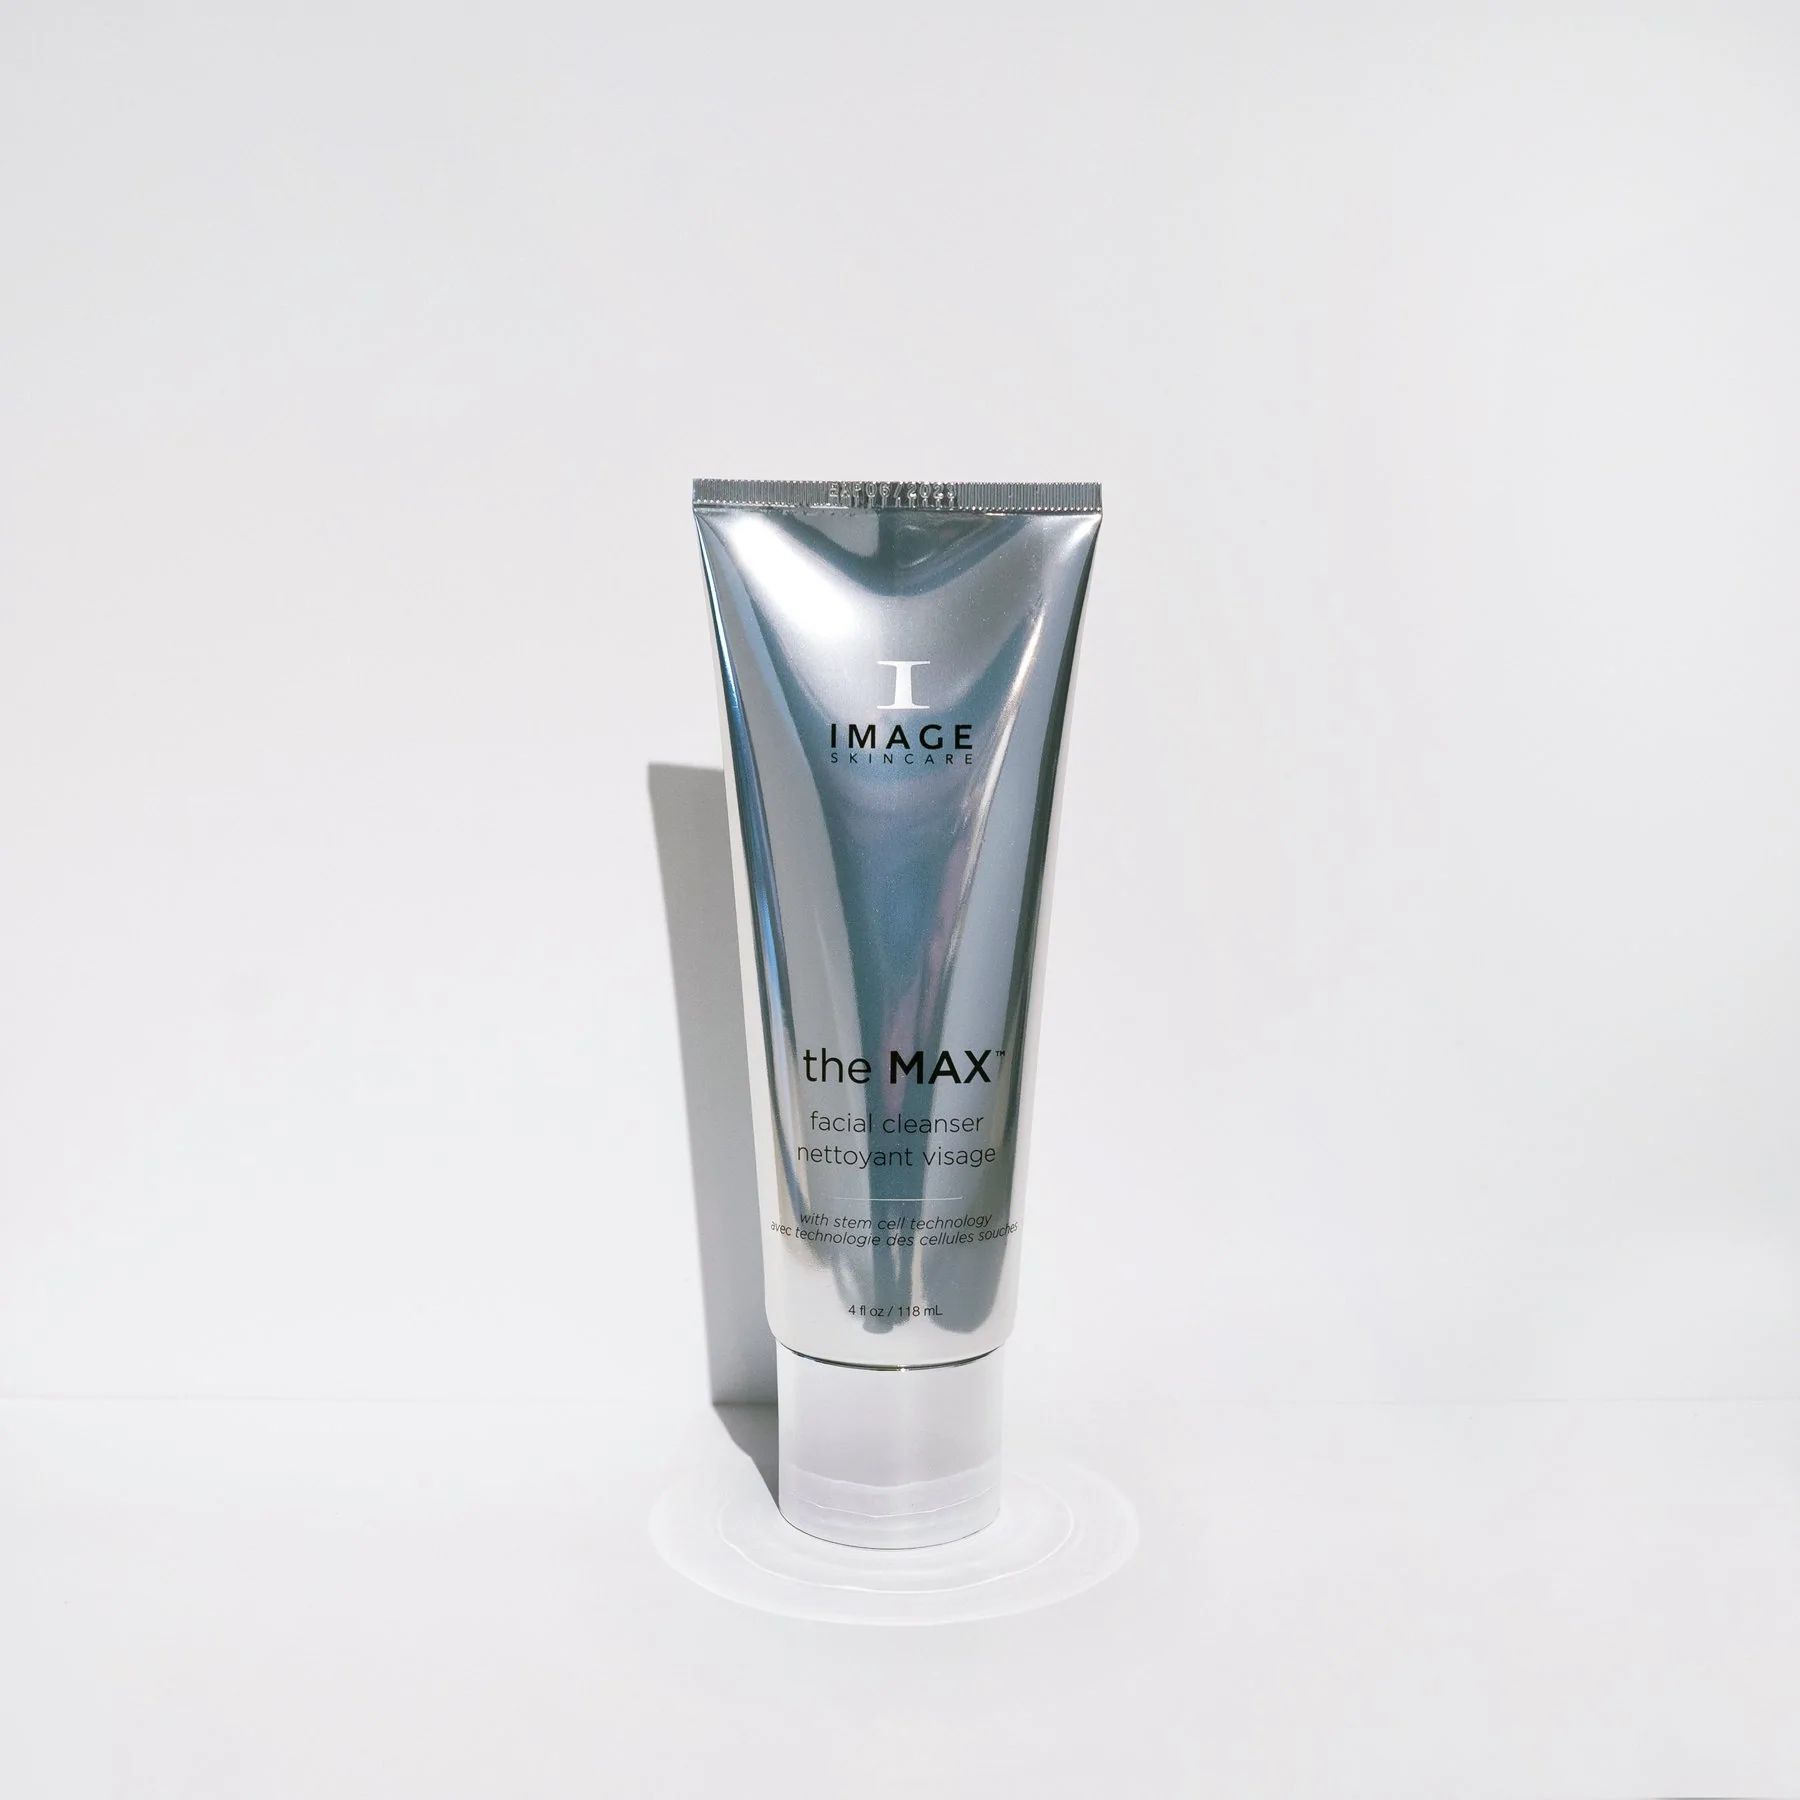 the MAX™ facial cleanser | Image Skincare